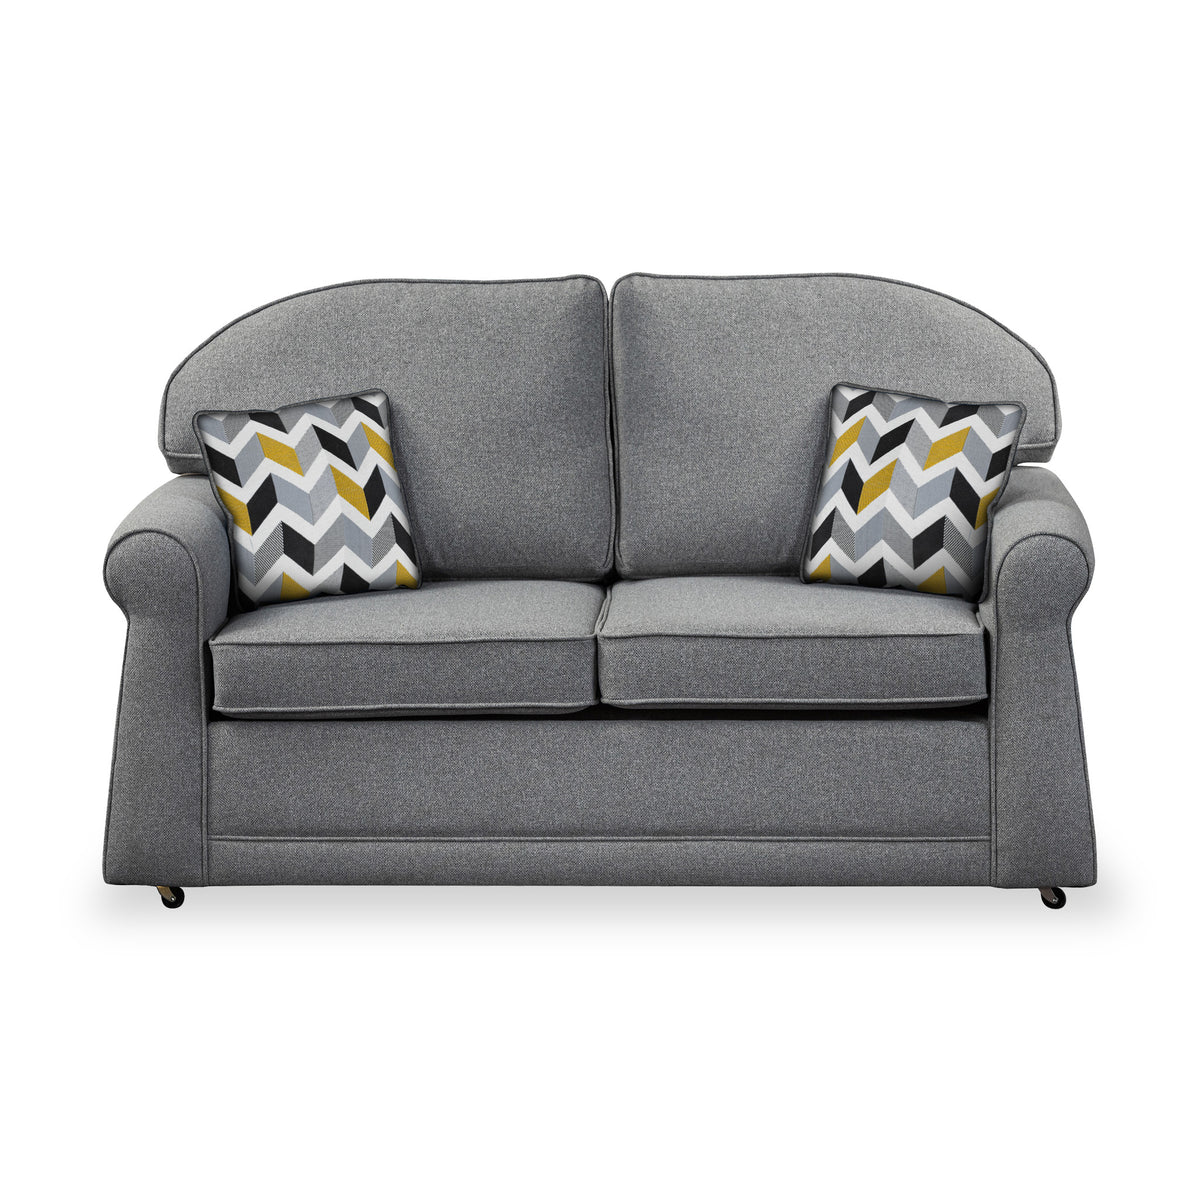 Croxdon Silver Faux Linen 2 Seater Sofabed with Mustard Scatter Cushions from Roseland Furniture